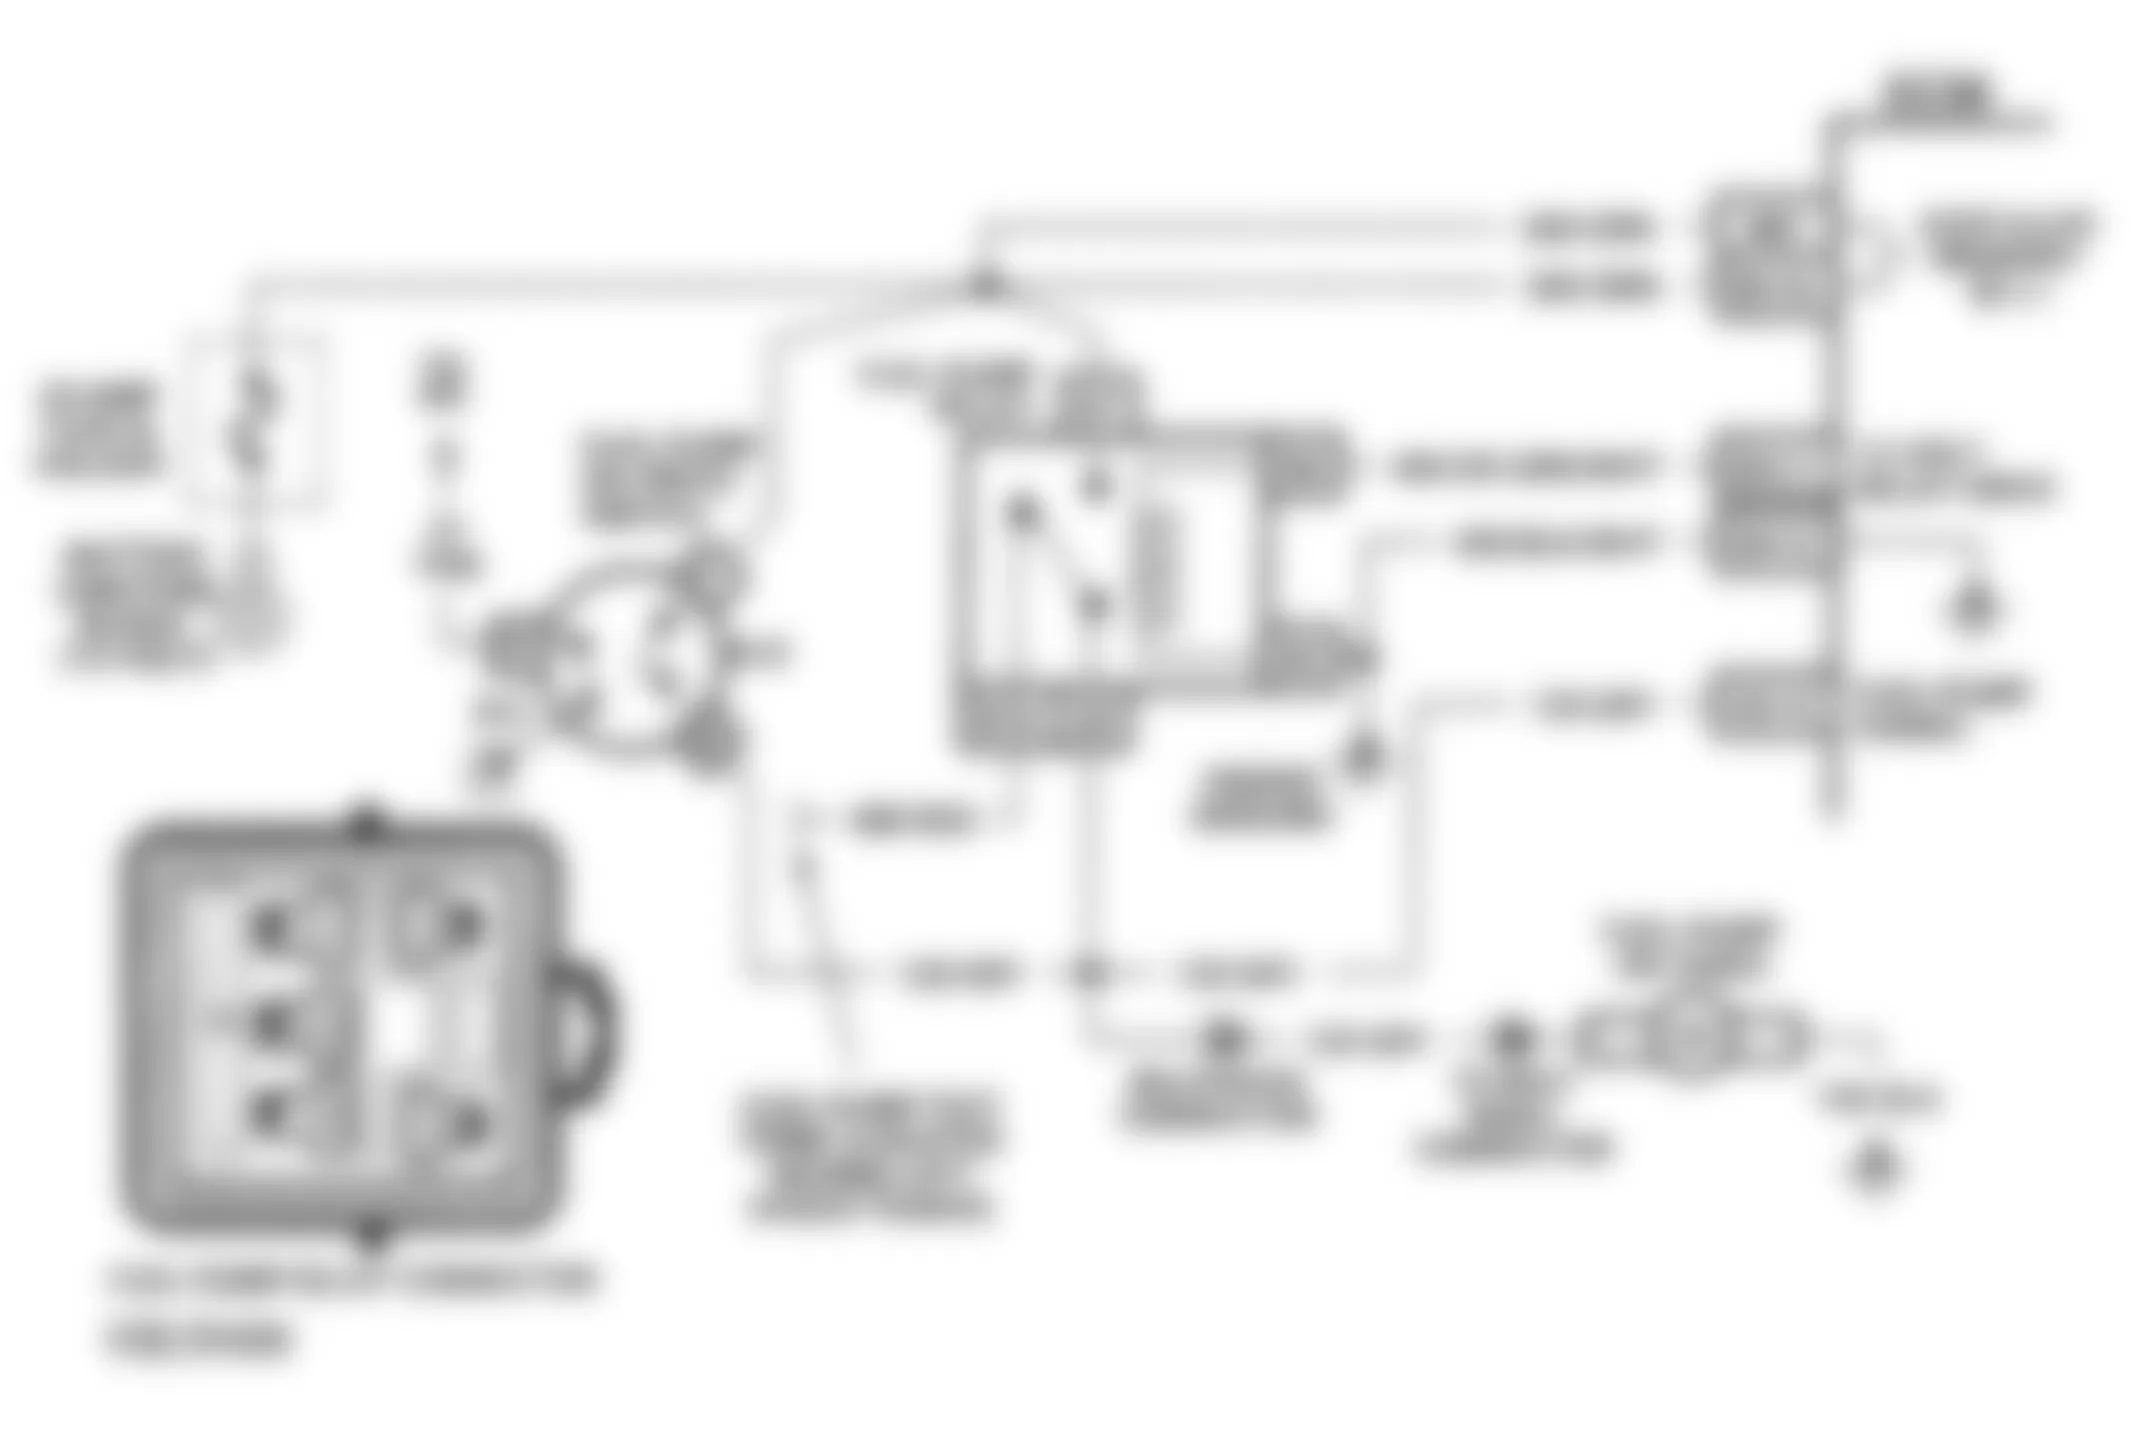 Buick Regal Limited 1993 - Component Locations -  Code 54 Schematic (3.1 L Body) Fuel Pump Voltage Low